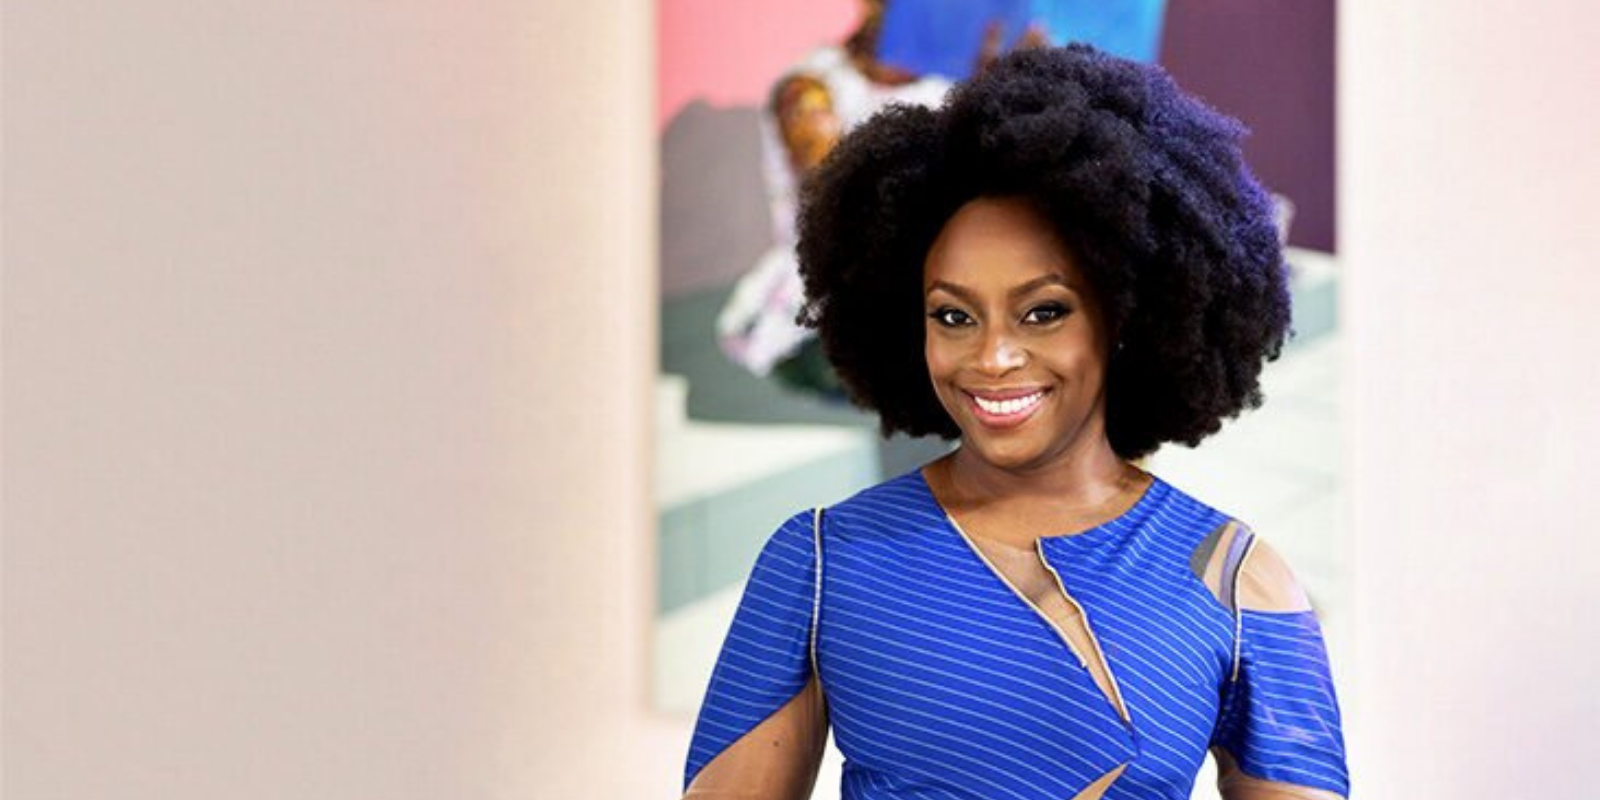 What does Chimamanda Adichie do for a living?